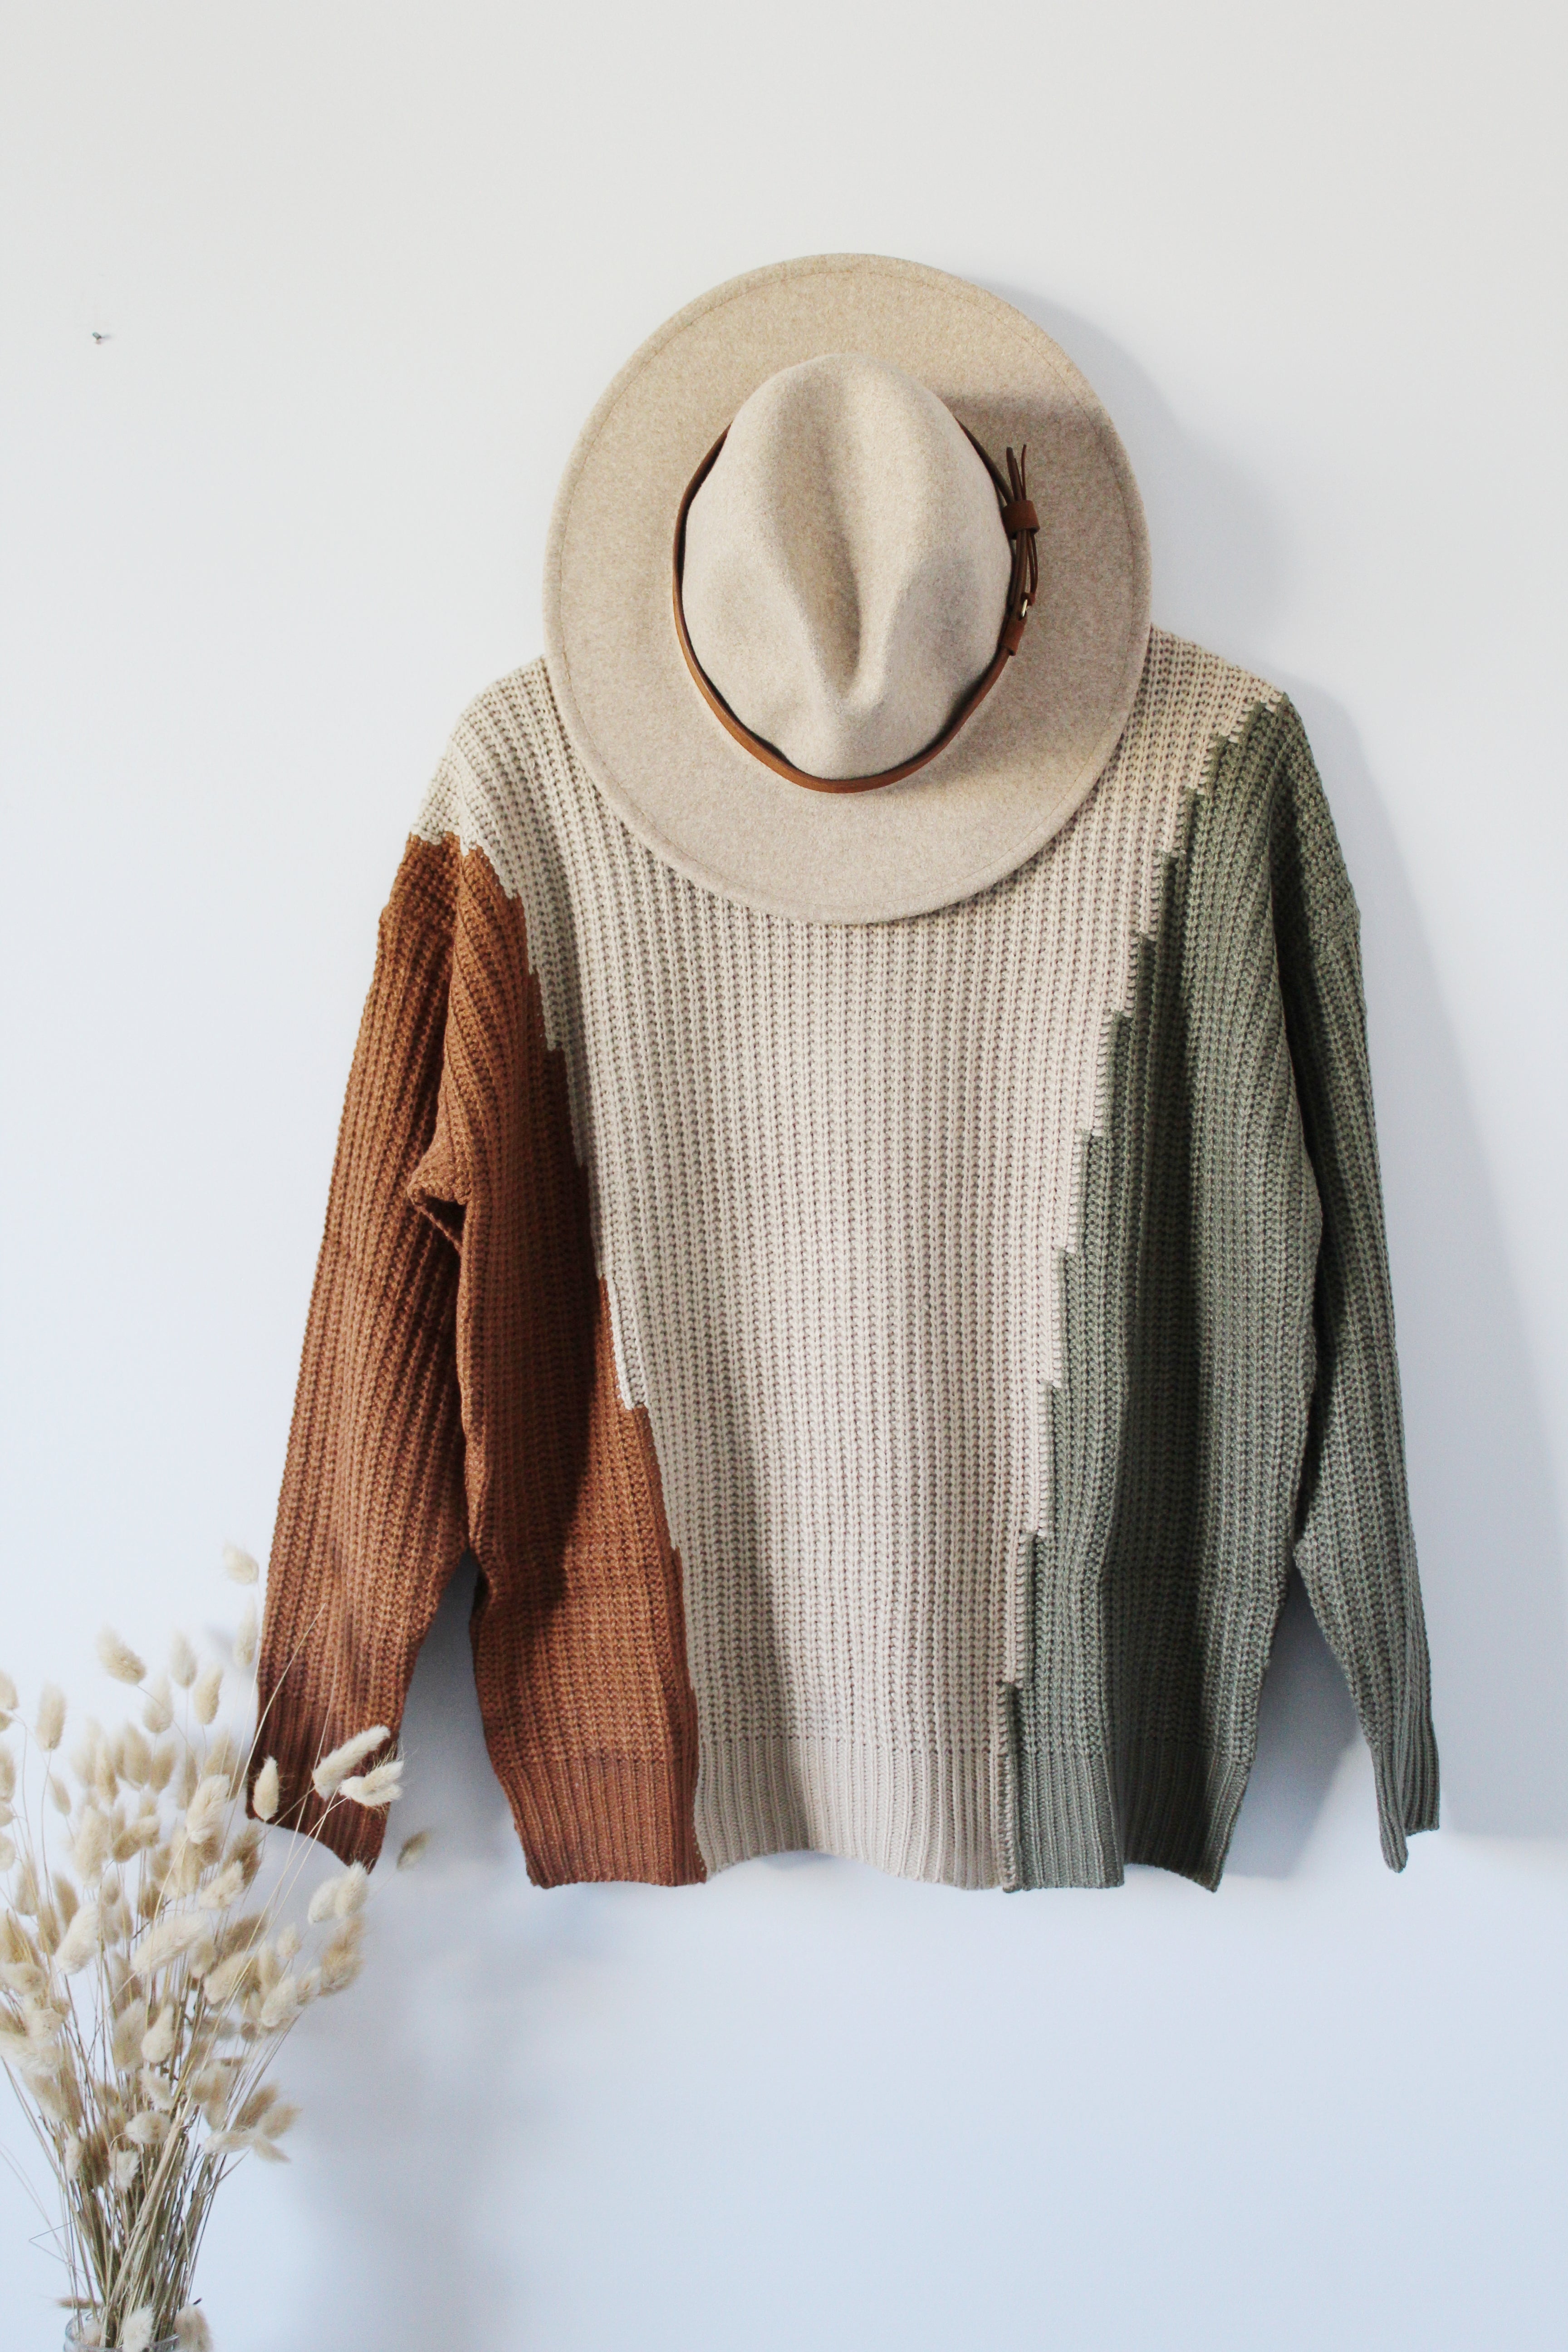 Willow knit sweater